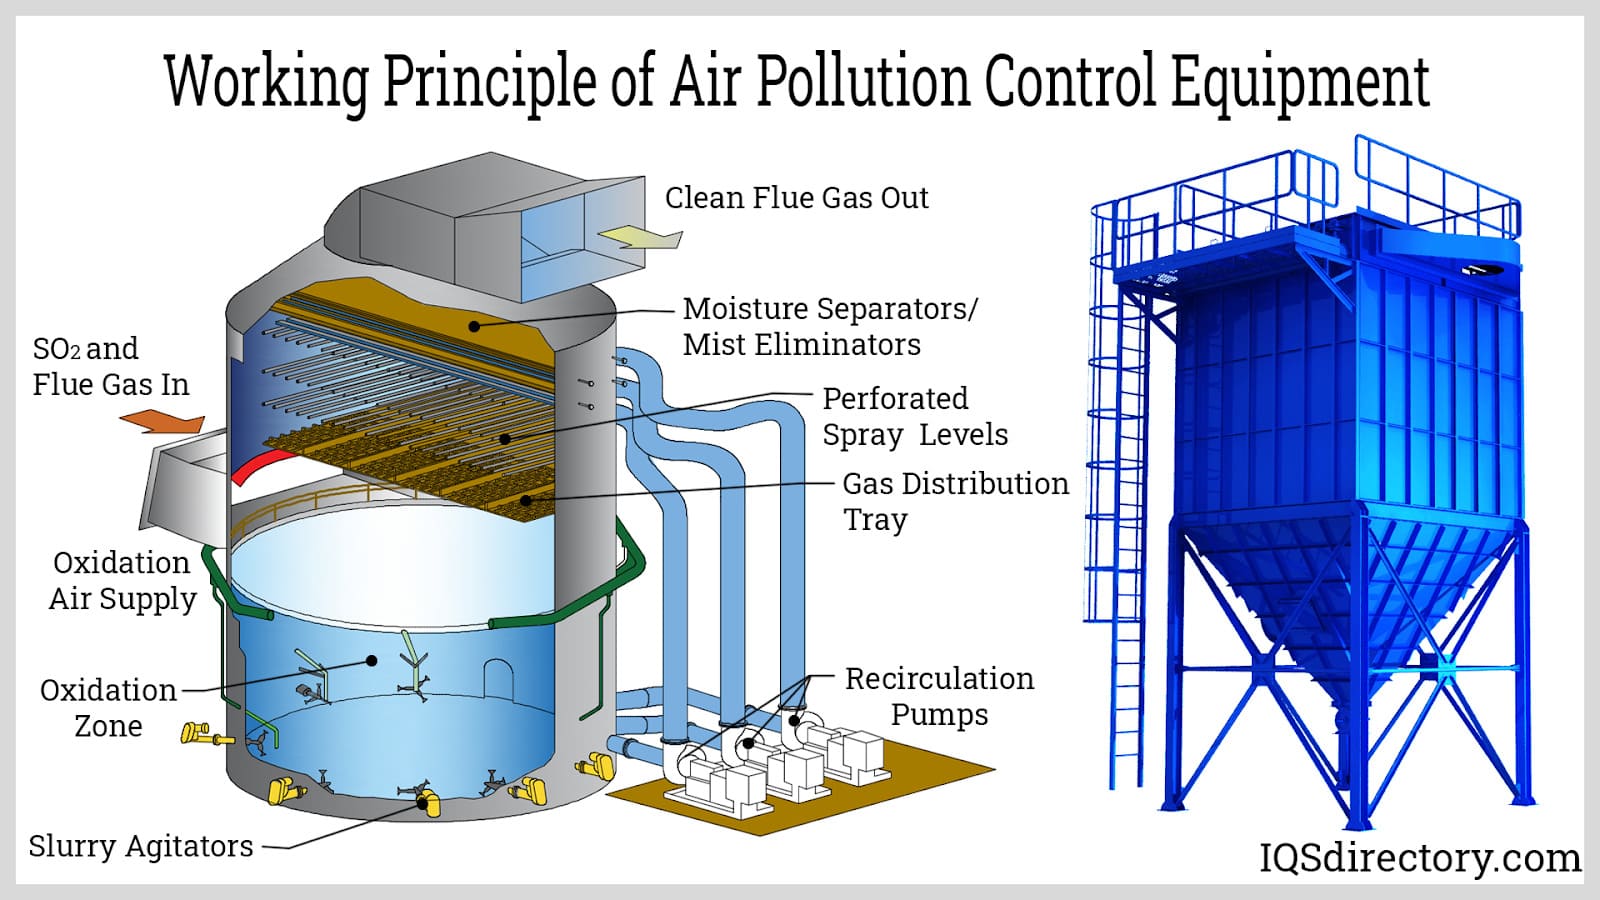 Working Principle of Air Pollution Control Equipment